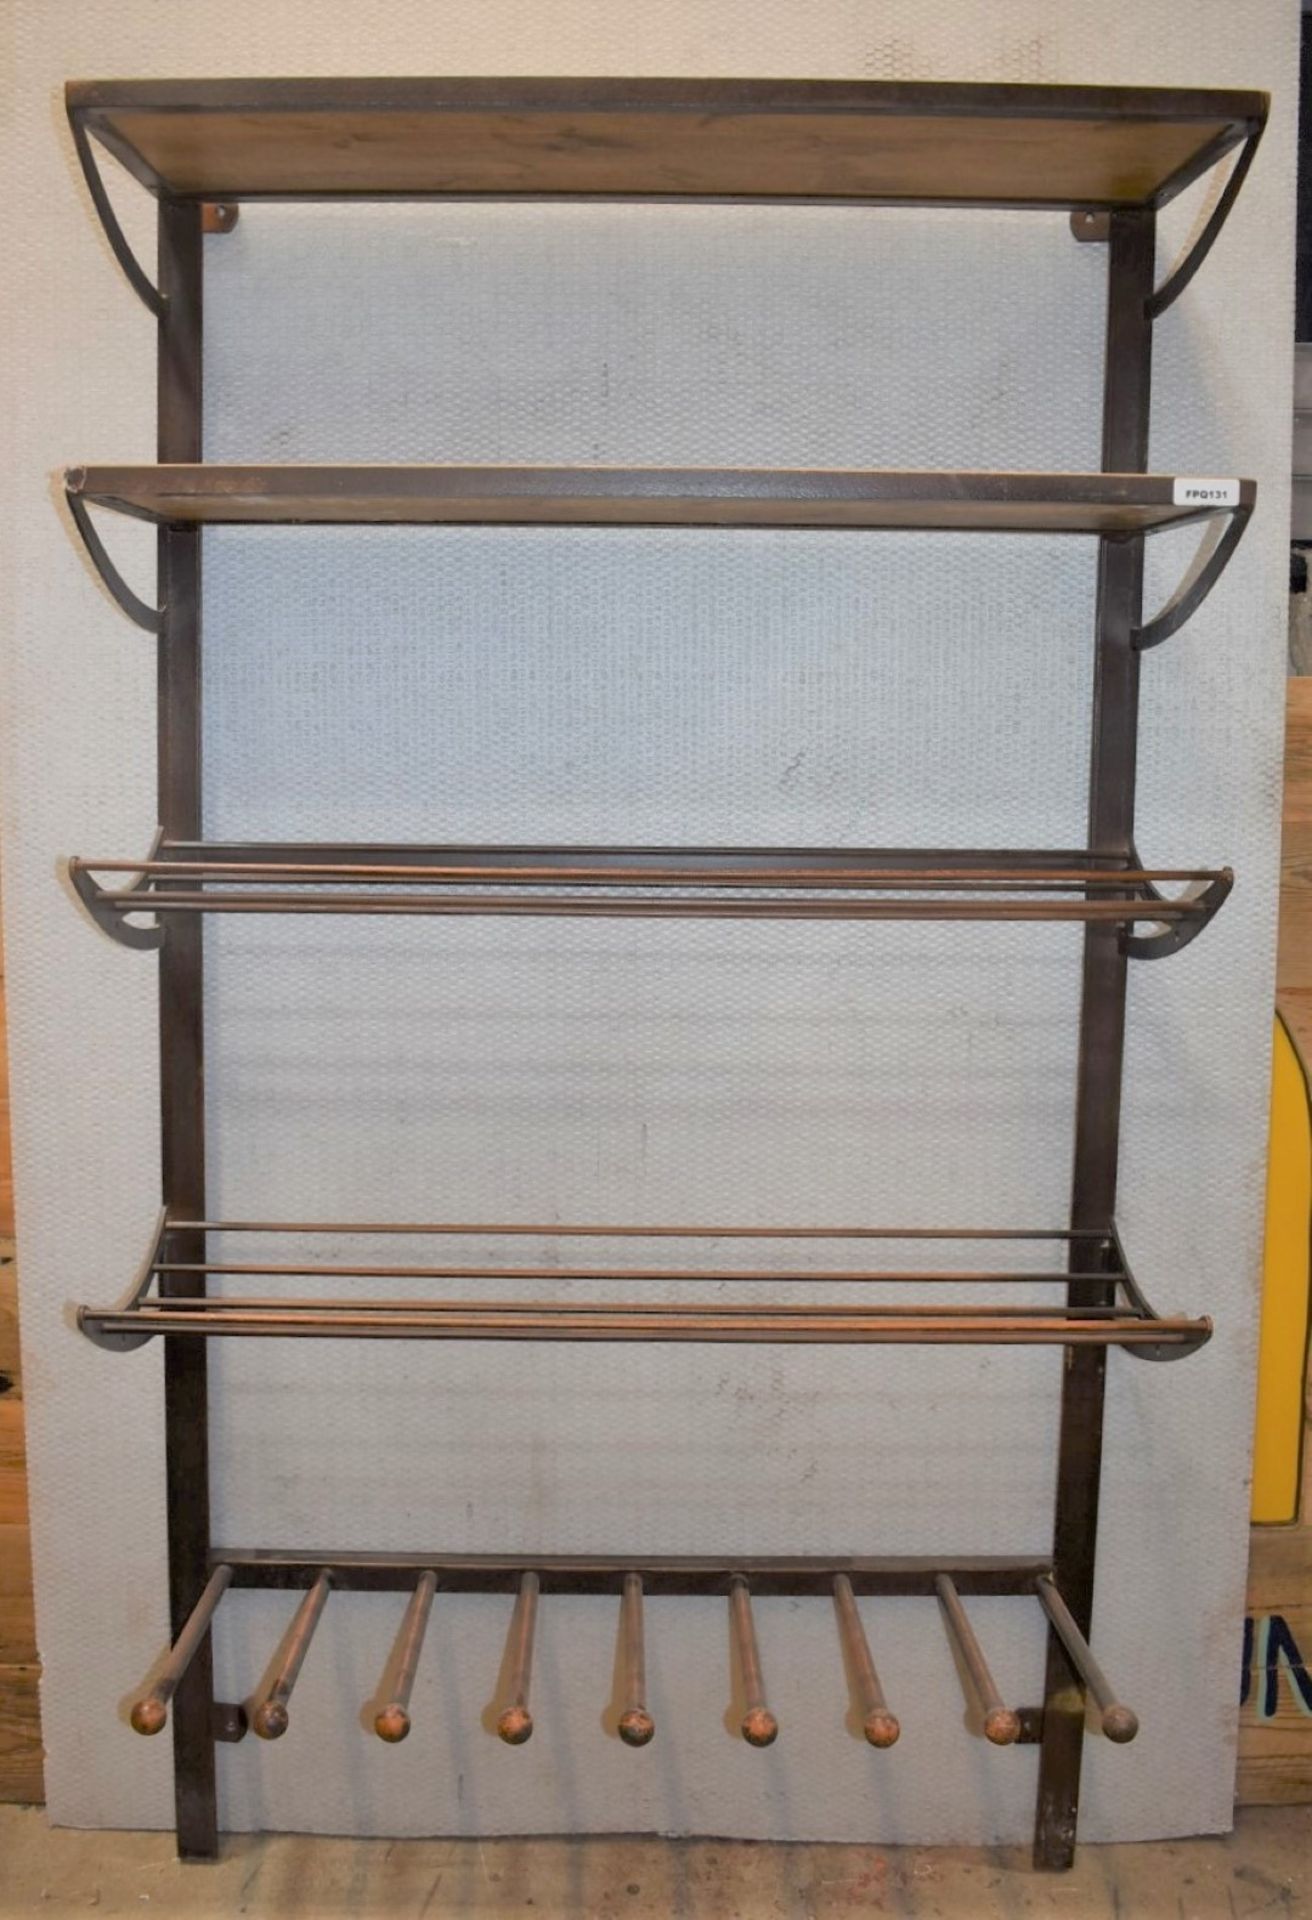 5 x Rustic Bakery Wall Shelf Units With a Rustic Traditional Finish - Over 14ft in Length! - Image 10 of 25